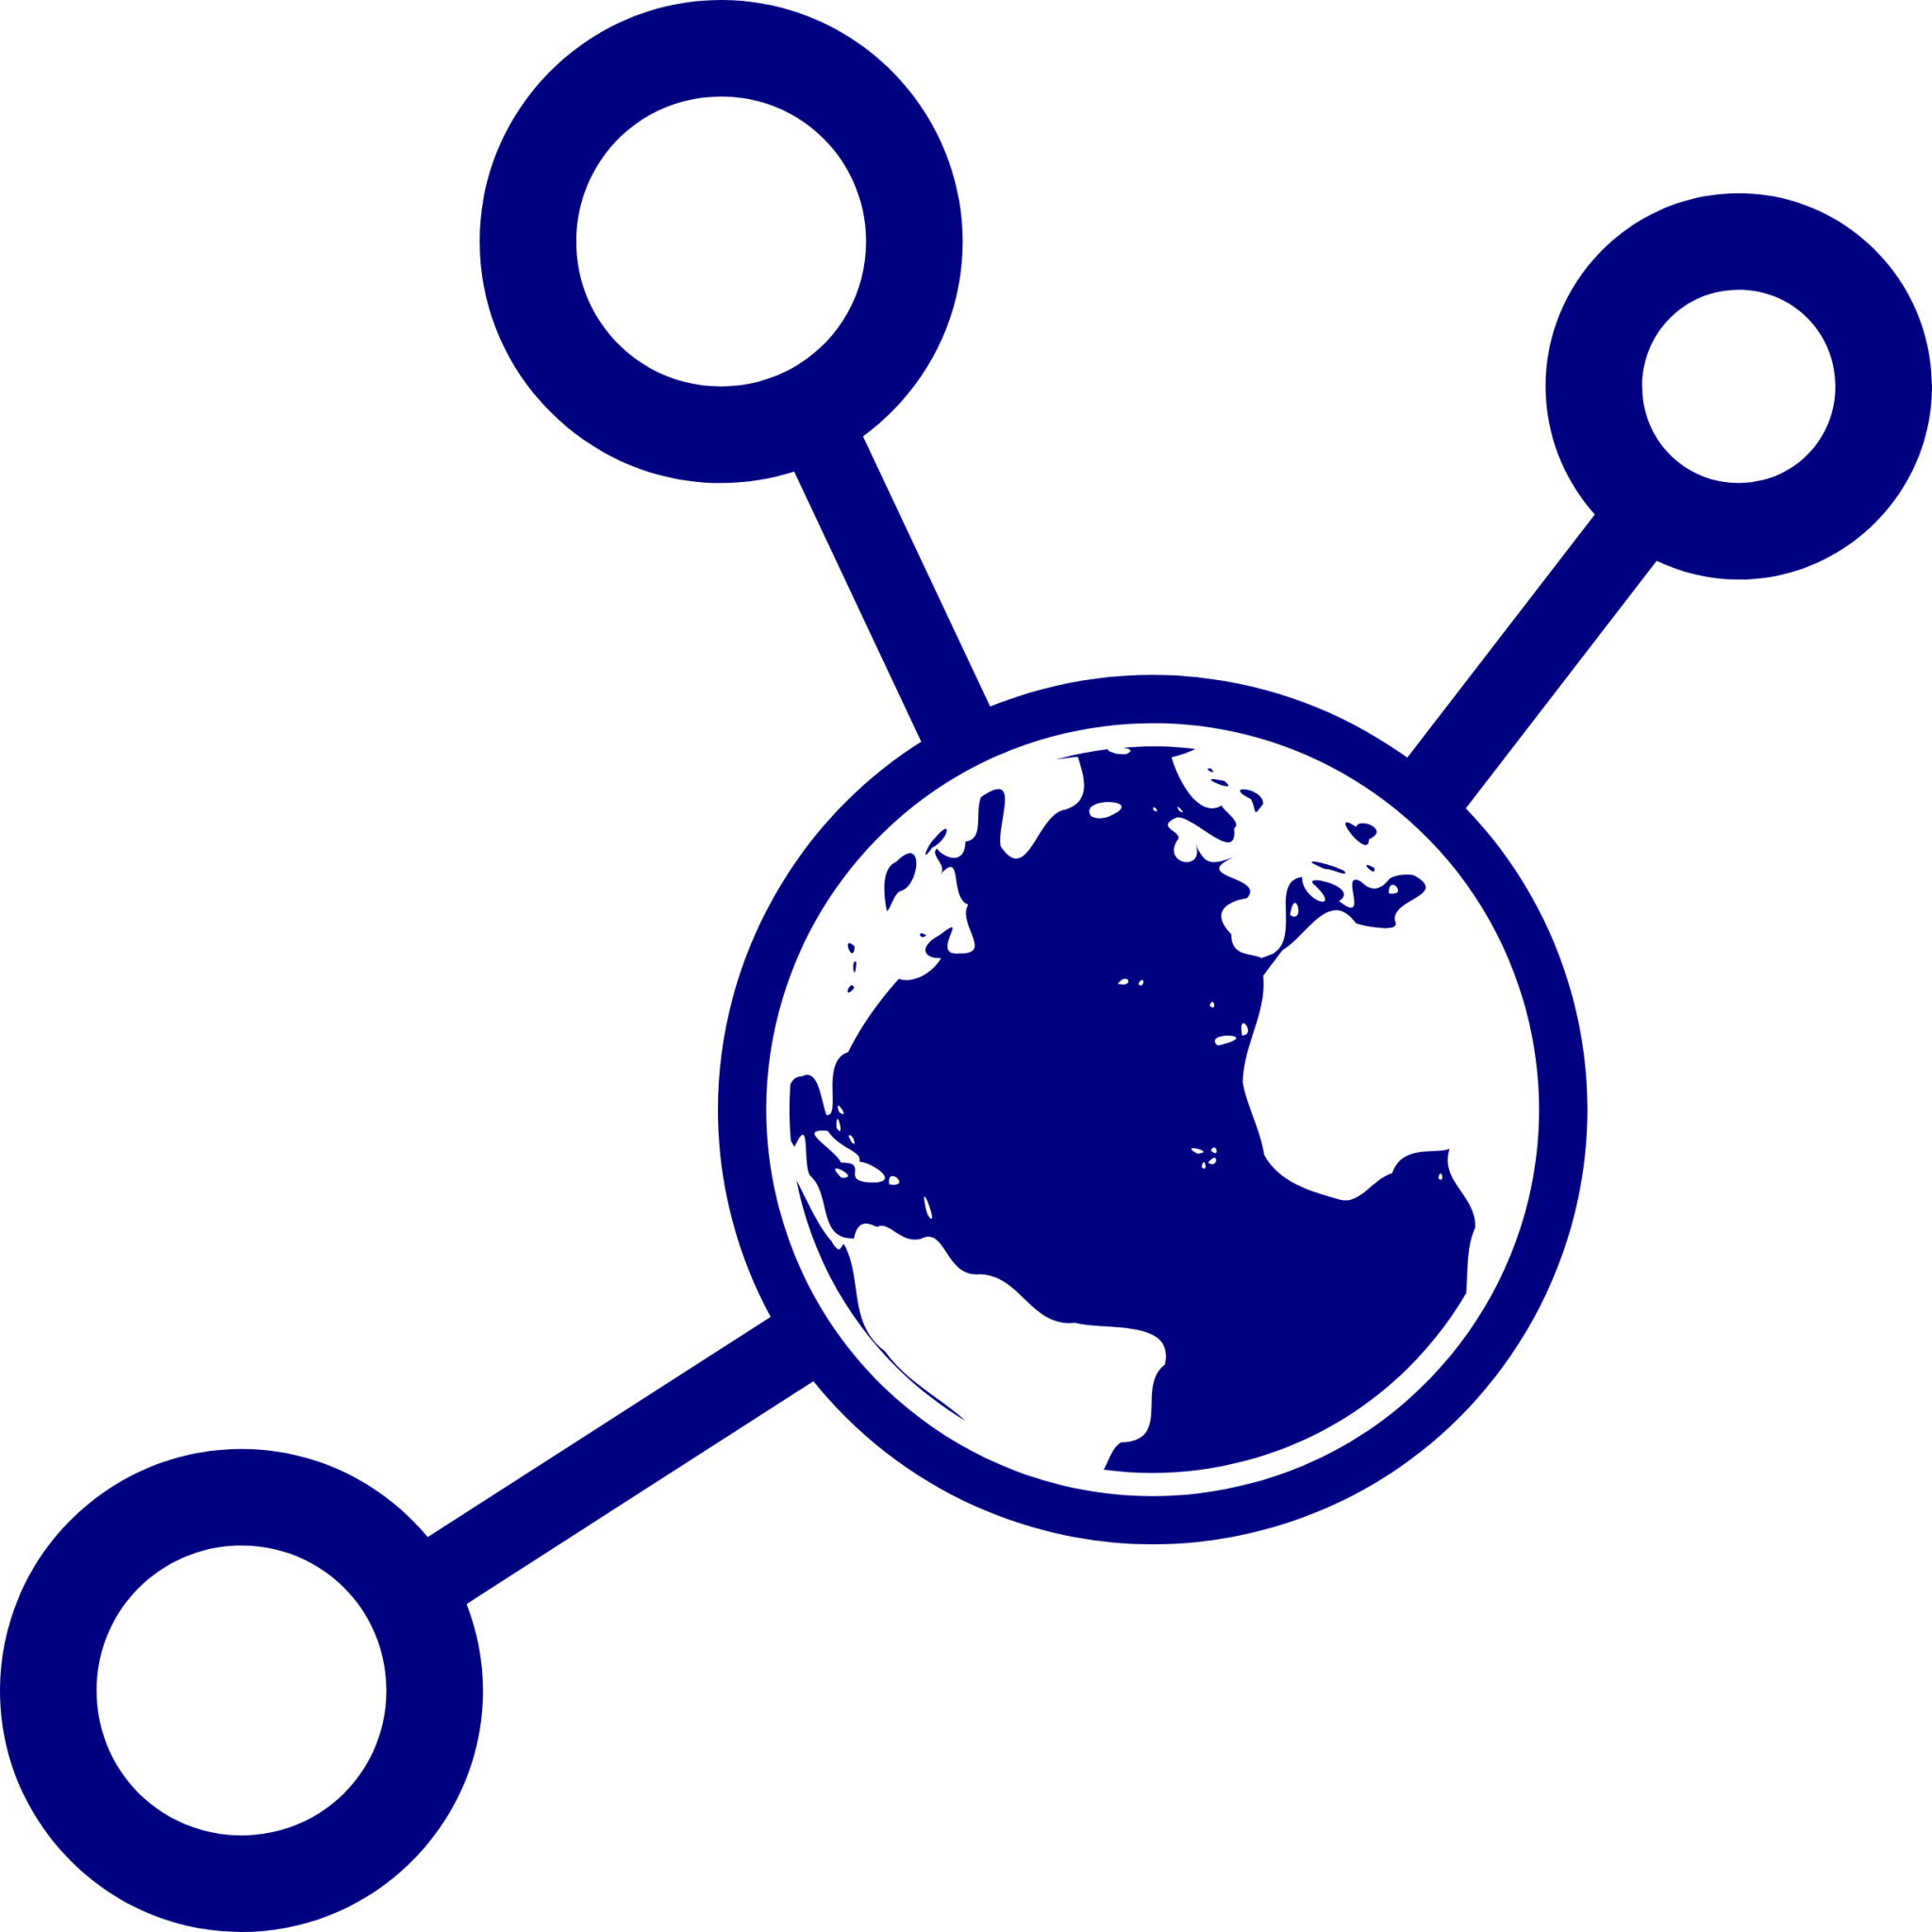 earth network outline icon